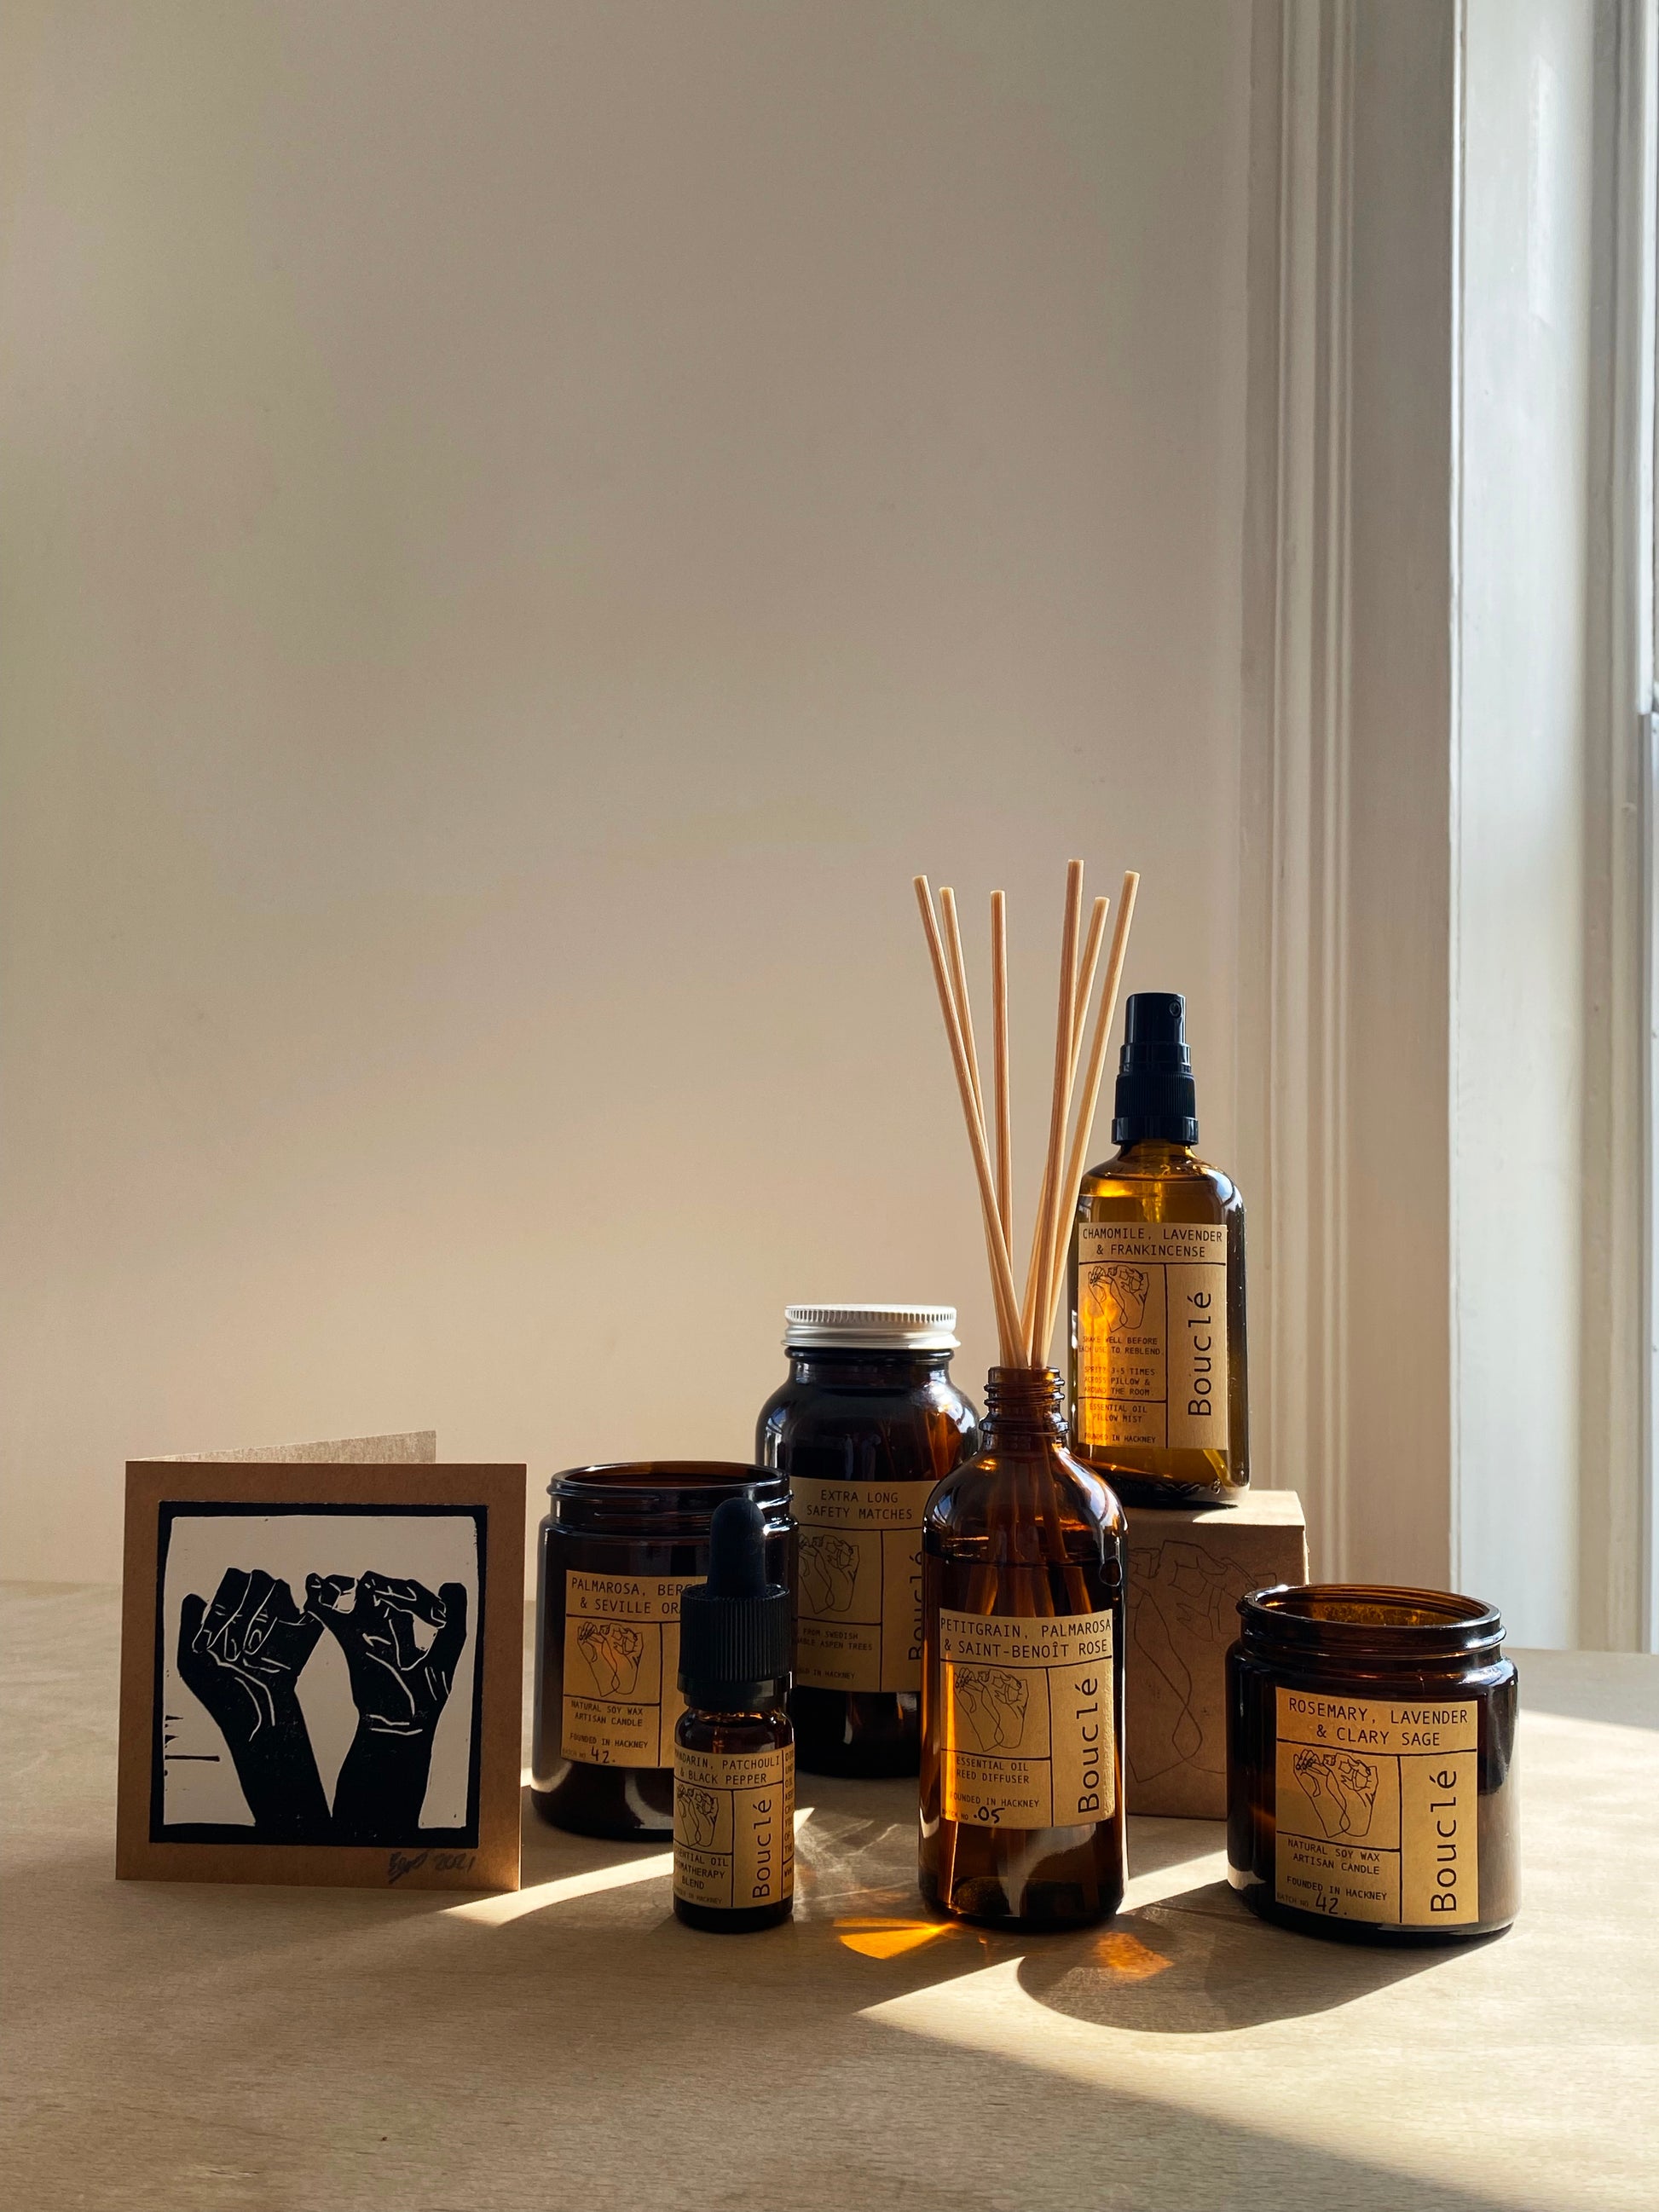 Luxury hand crafted home fragrance essential oil vegan products by Bouclé in East London & Brighton. The amber glassware are perfect for minimal interior styling.